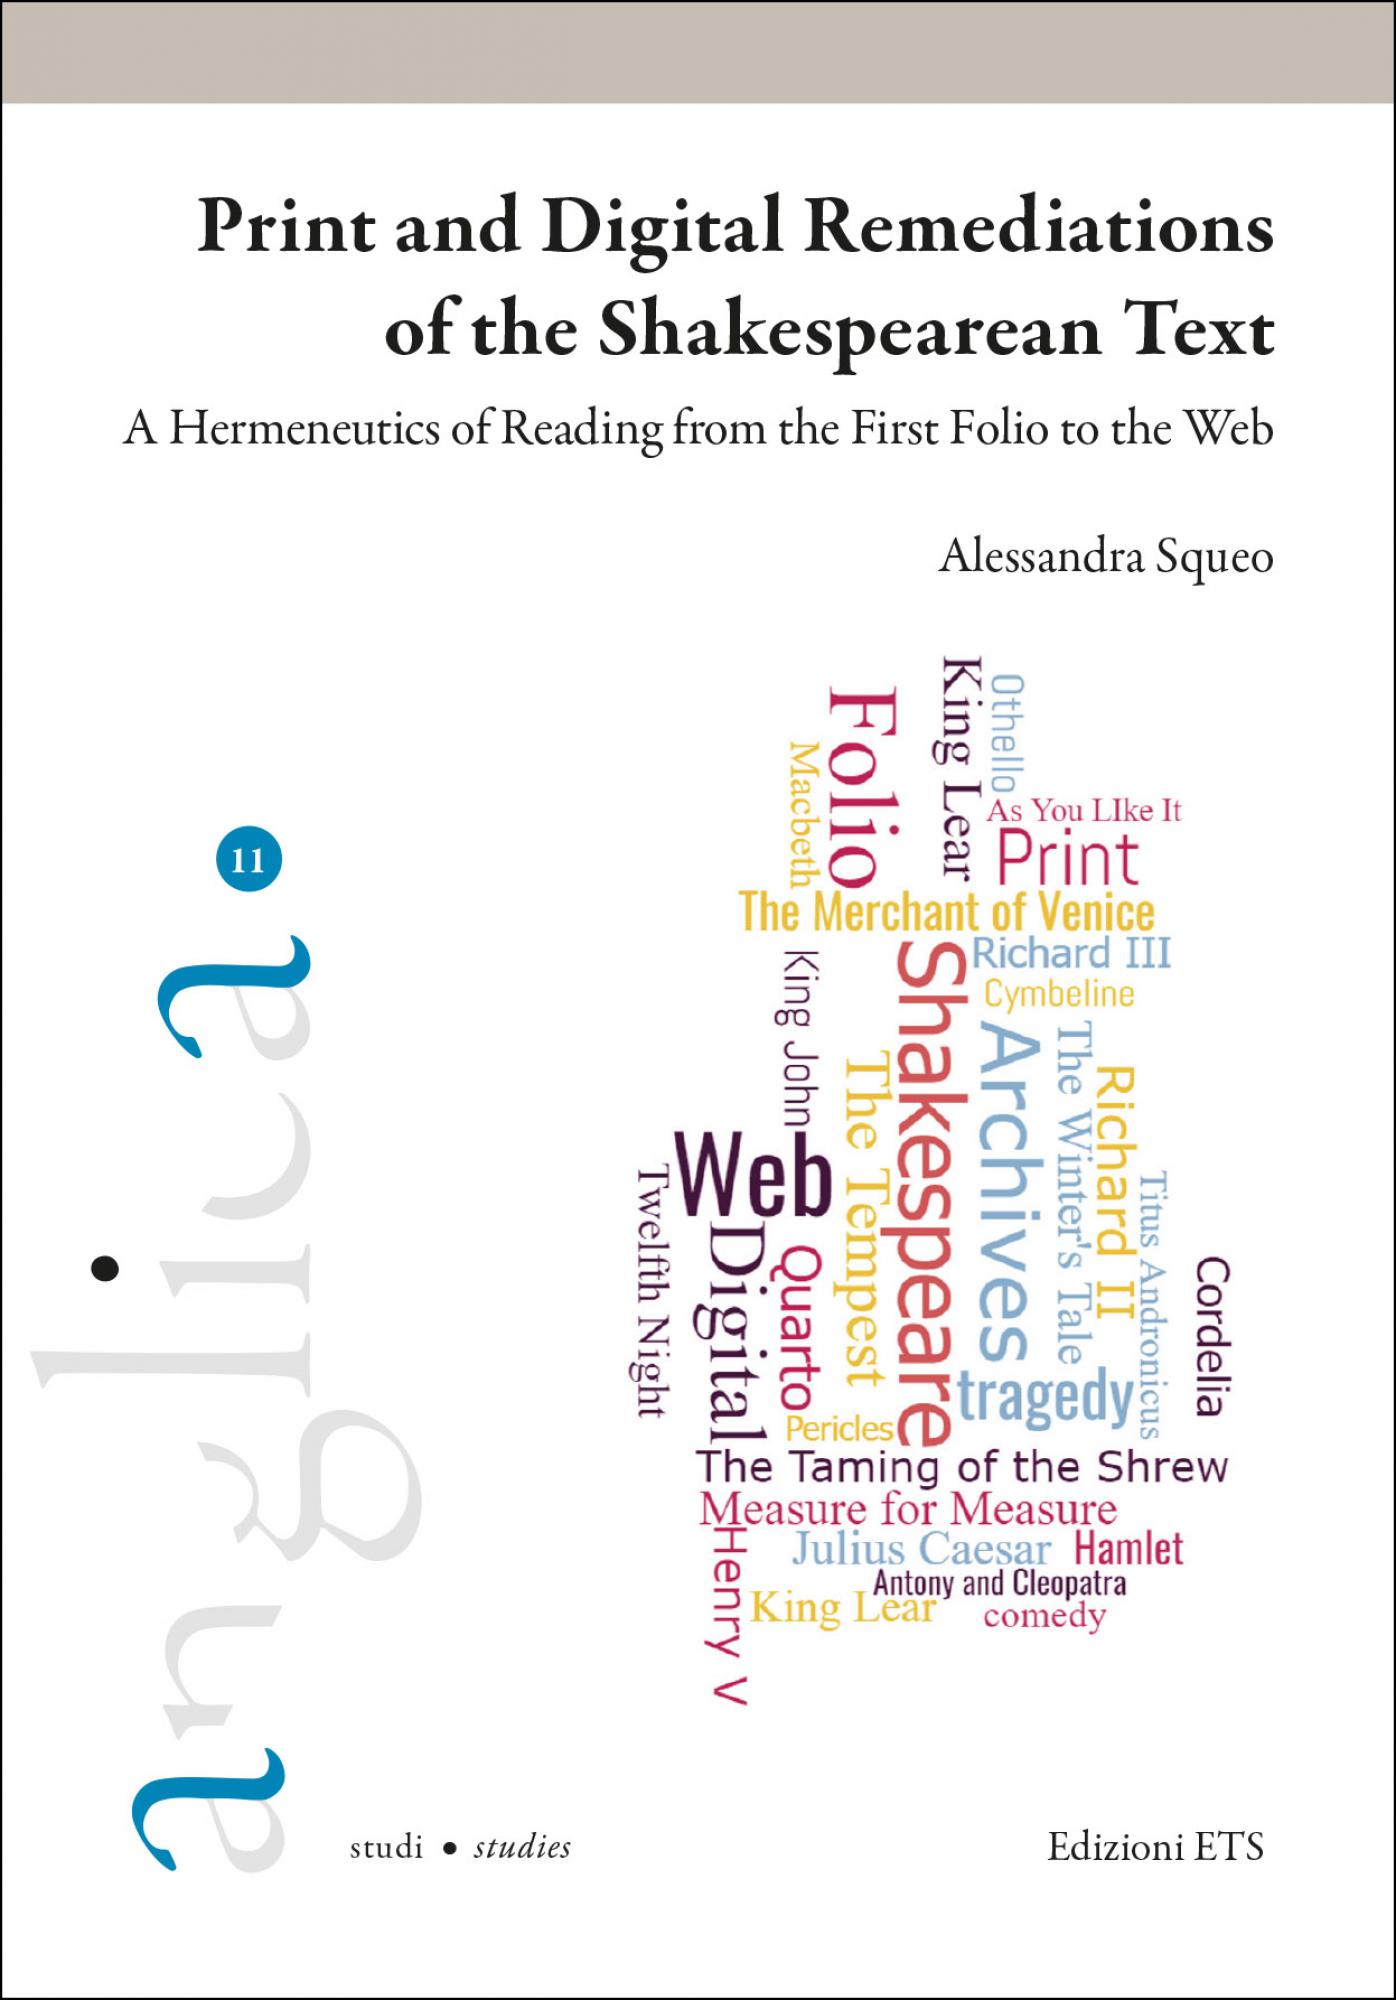 Print and Digital Remediations of the Shakespearean Text.A Hermeneutics of Reading from the First Folio to the Web